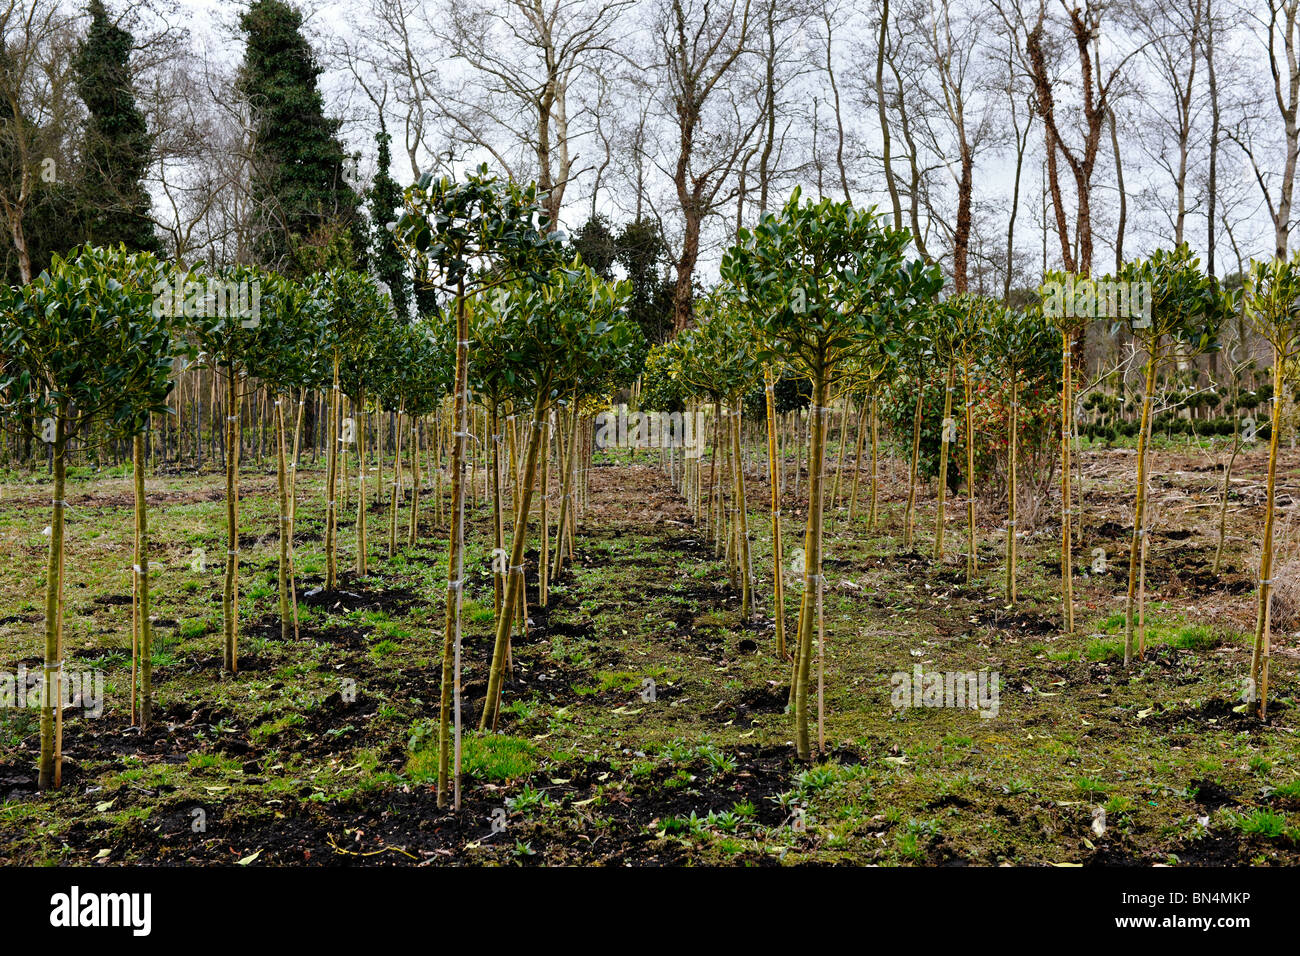 young ornamental trees growing Stock Photo